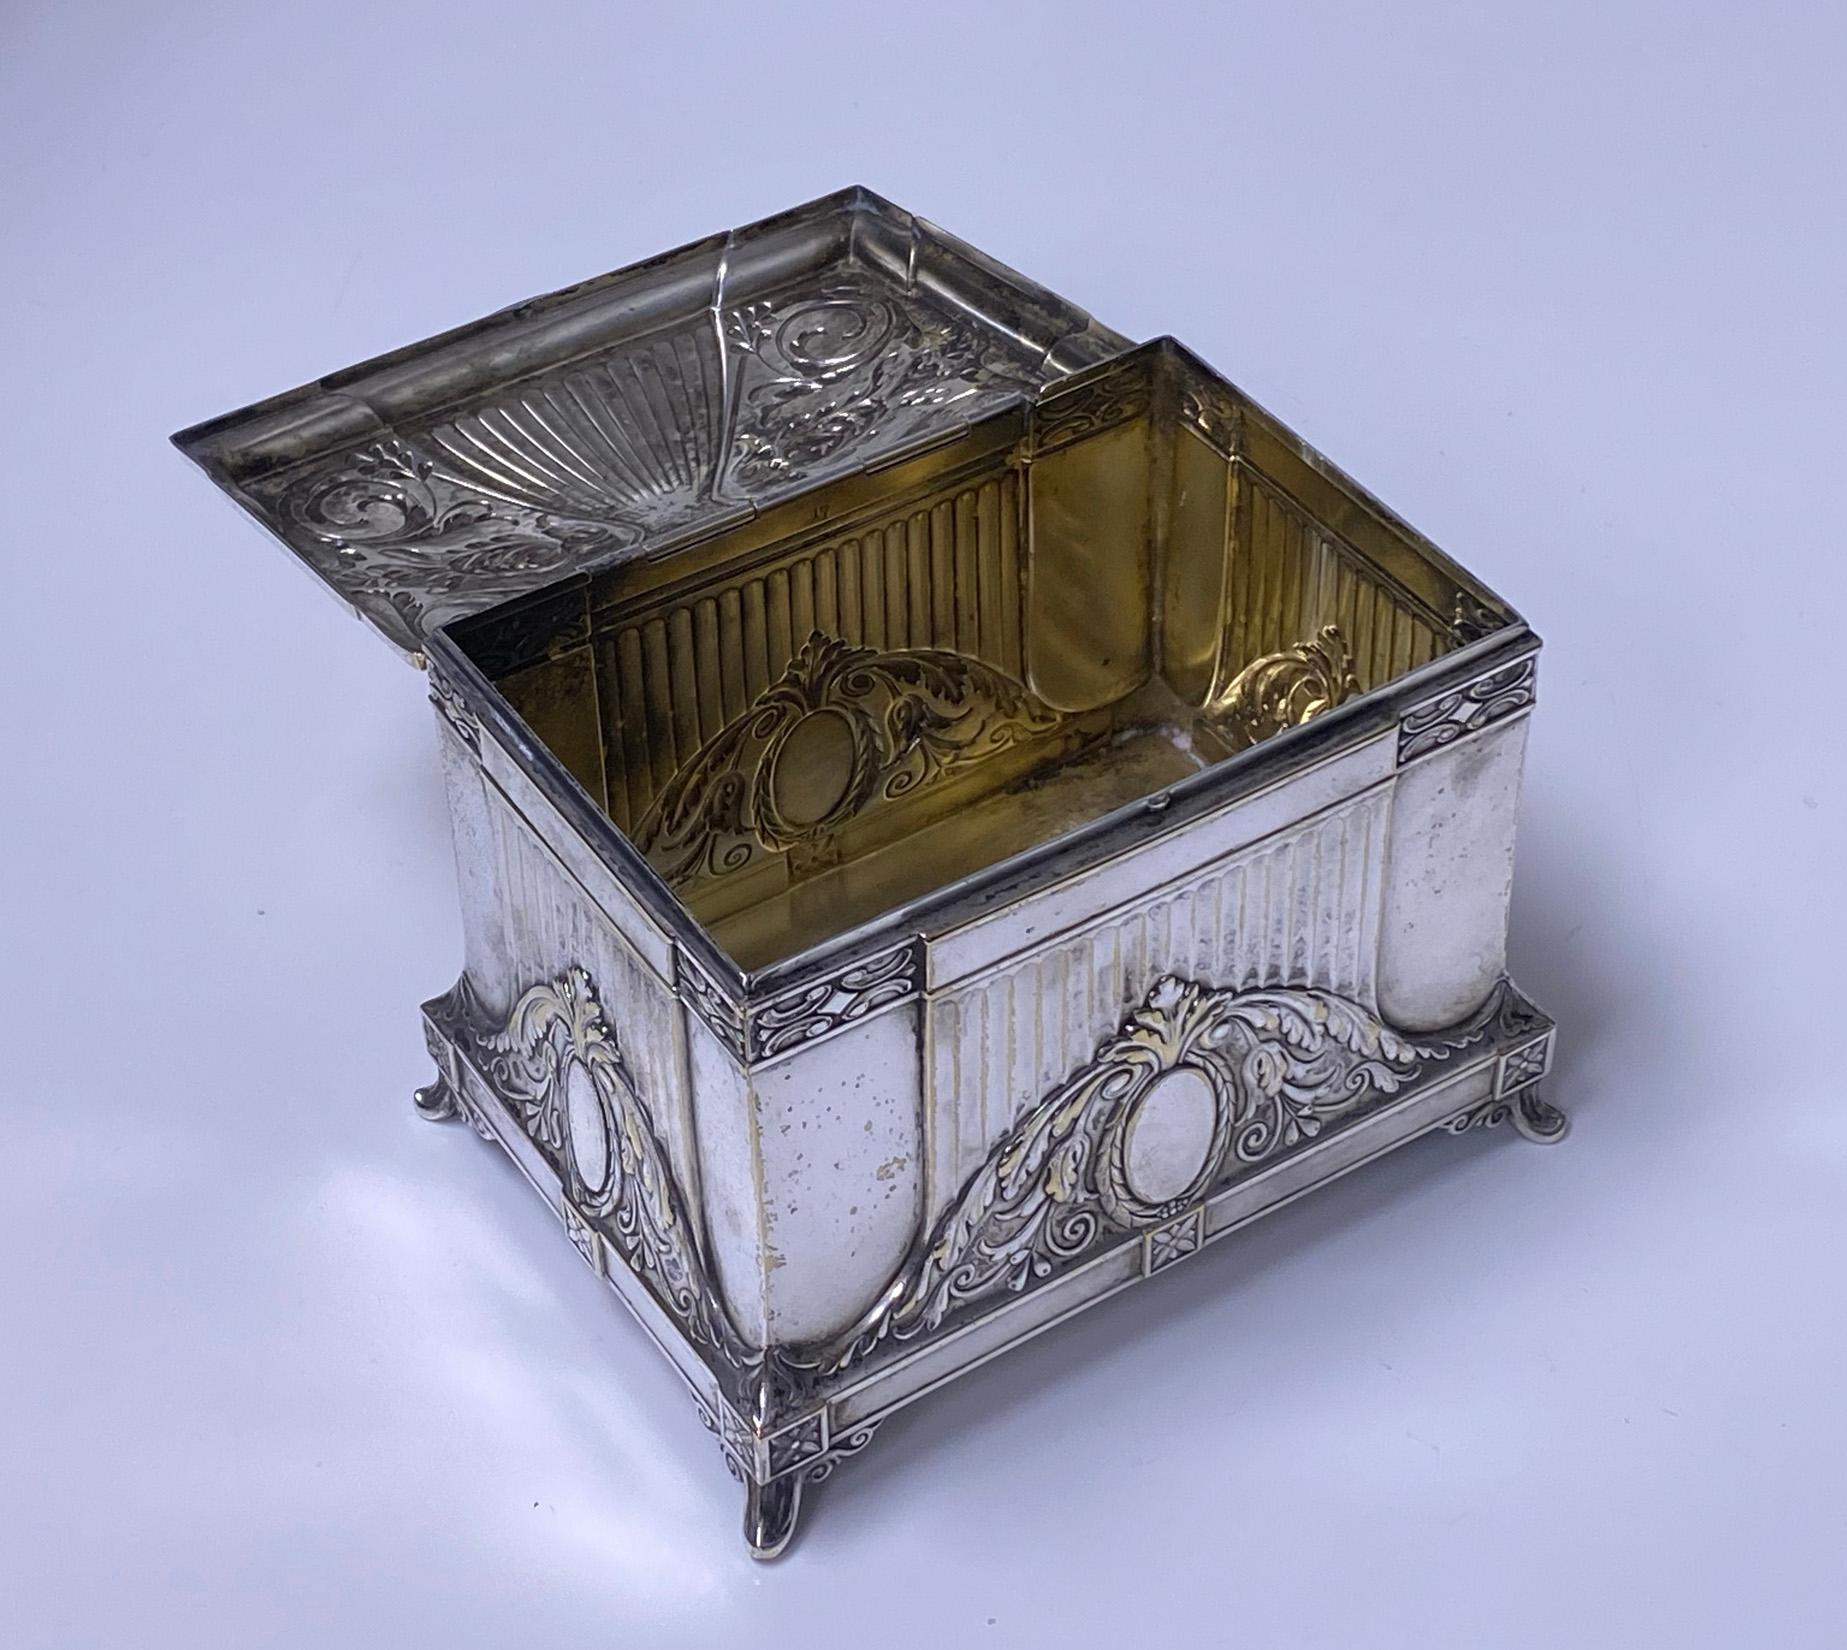 WMF Jugendstil secessionist silver plate jewellery box, Germany, circa 1900. The box of rectangular shape on four turned stylized supports, conforming in style to cornices and decoration of sides and concave dome shape hinged cover with